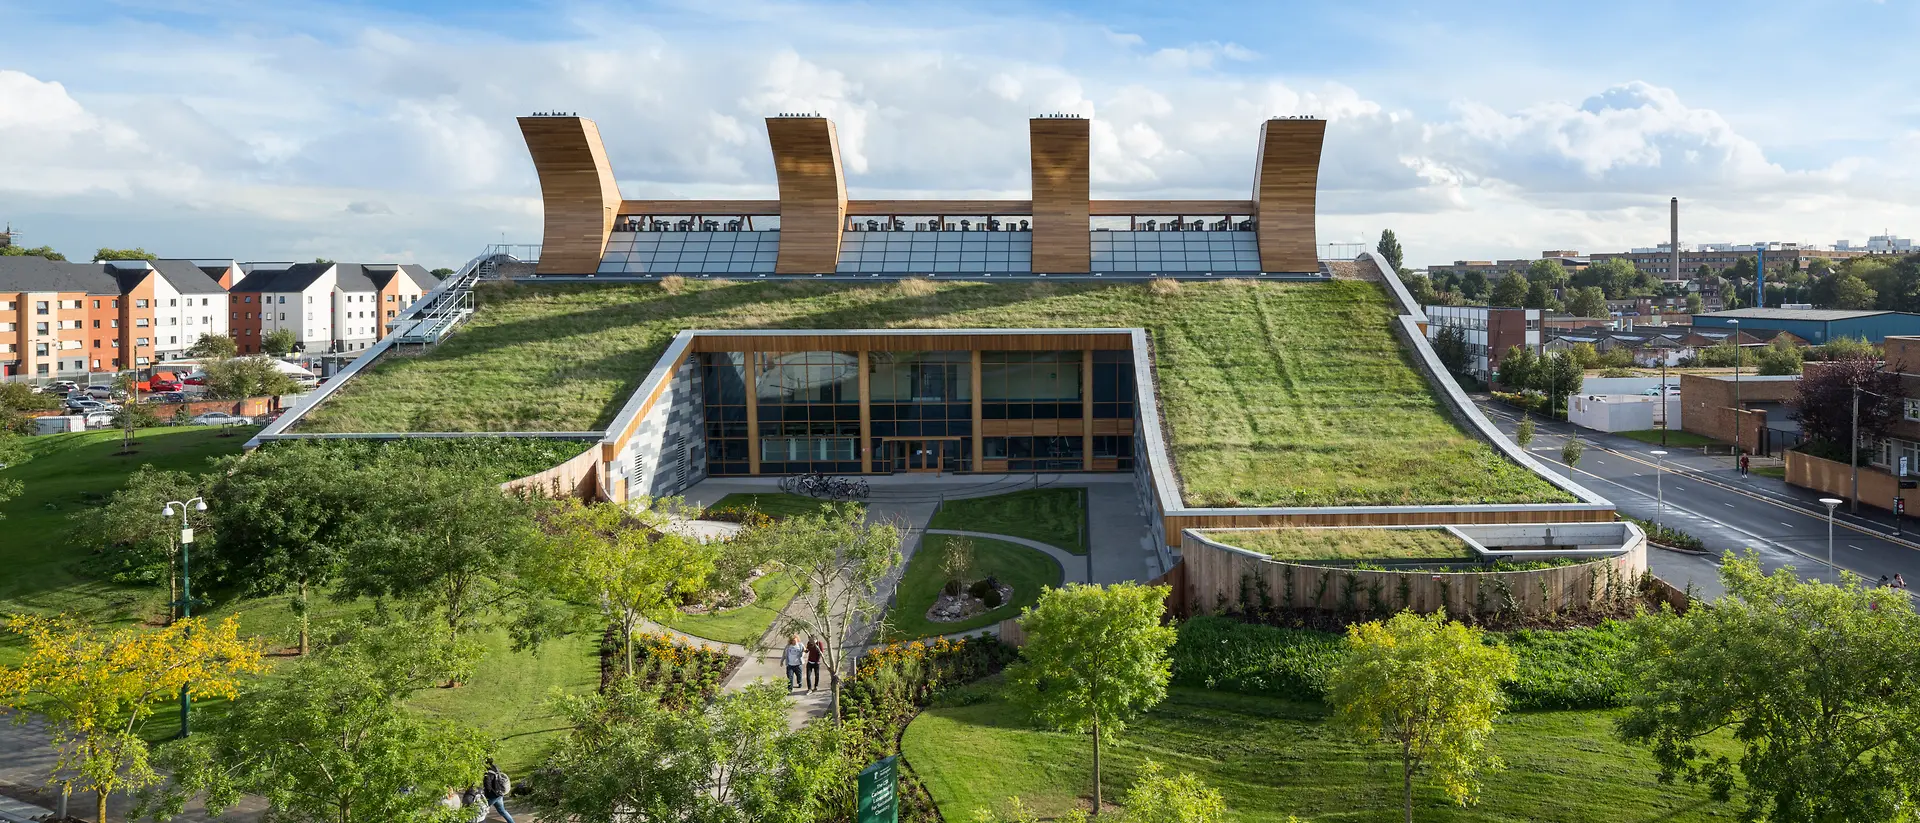 The Centre for Sustainable Chemistry: a glass and wood building with grass on the rooftop. It´s surrounded by a small park with trees.